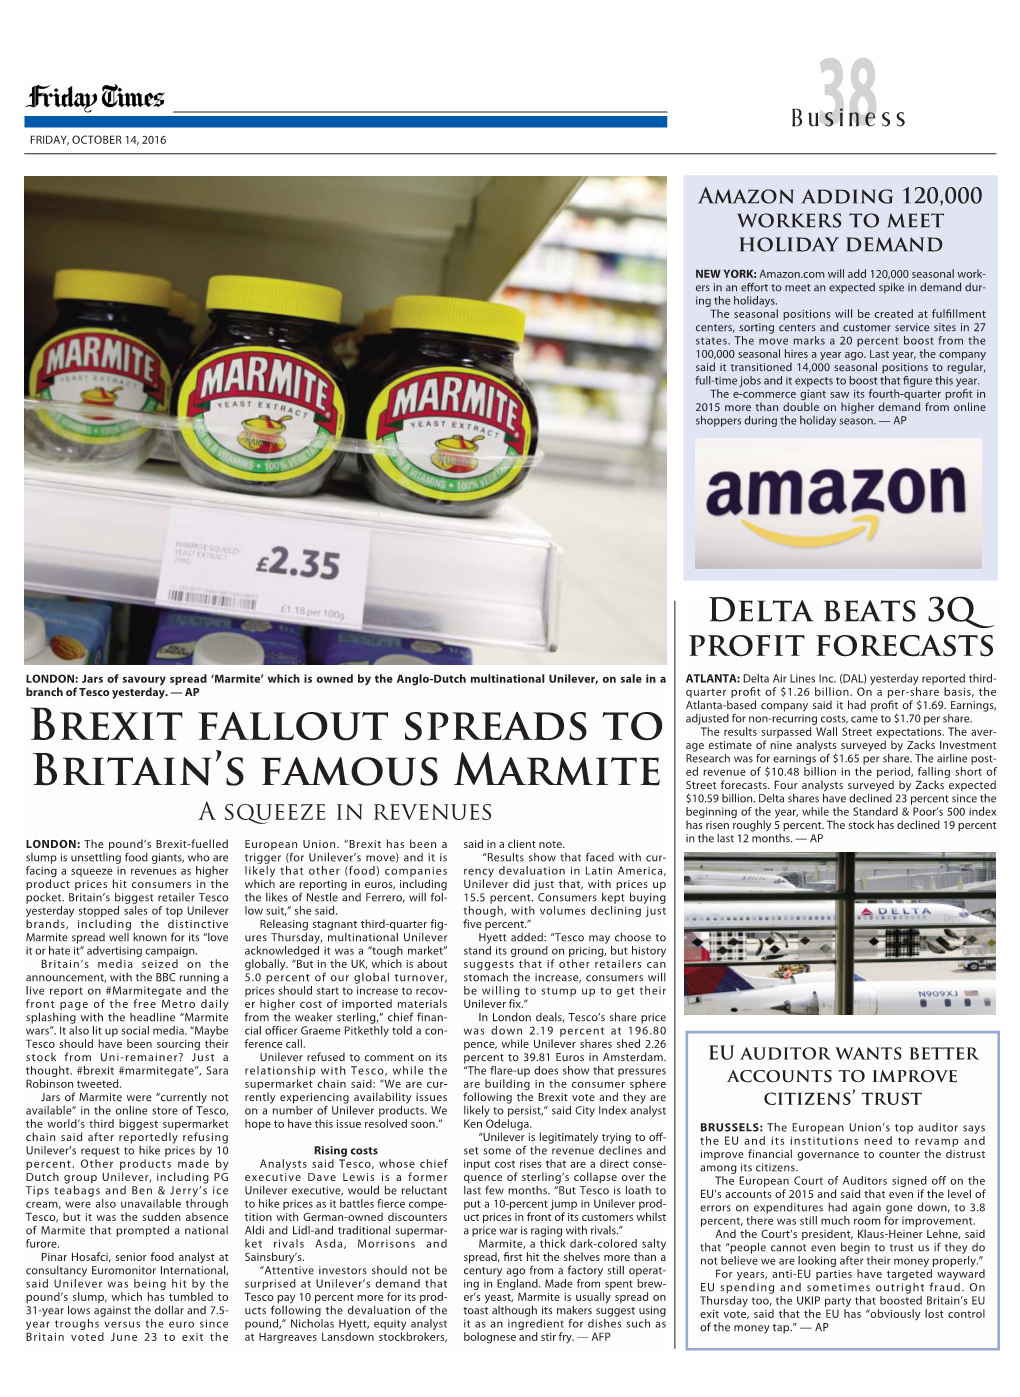 Brexit Fallout Spreads to Britain's Famous Marmite